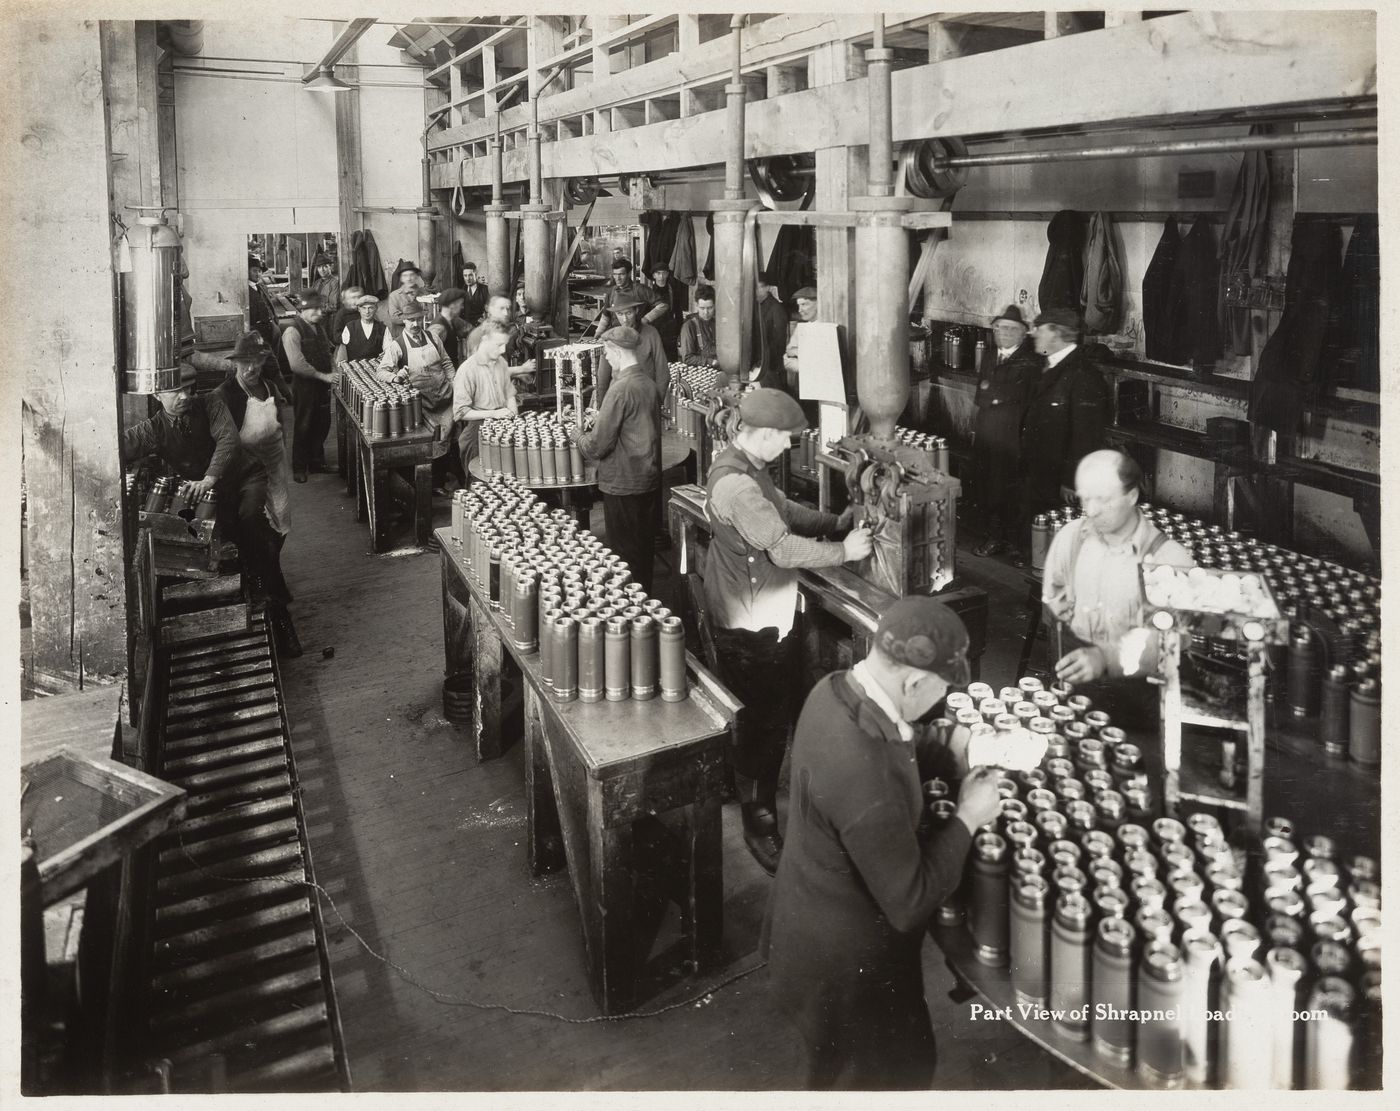 Interior view of workers in shrapnel loading room at the Energite Explosives Plant No. 3, the Shell Loading Plant, Renfrew, Ontario, Canada